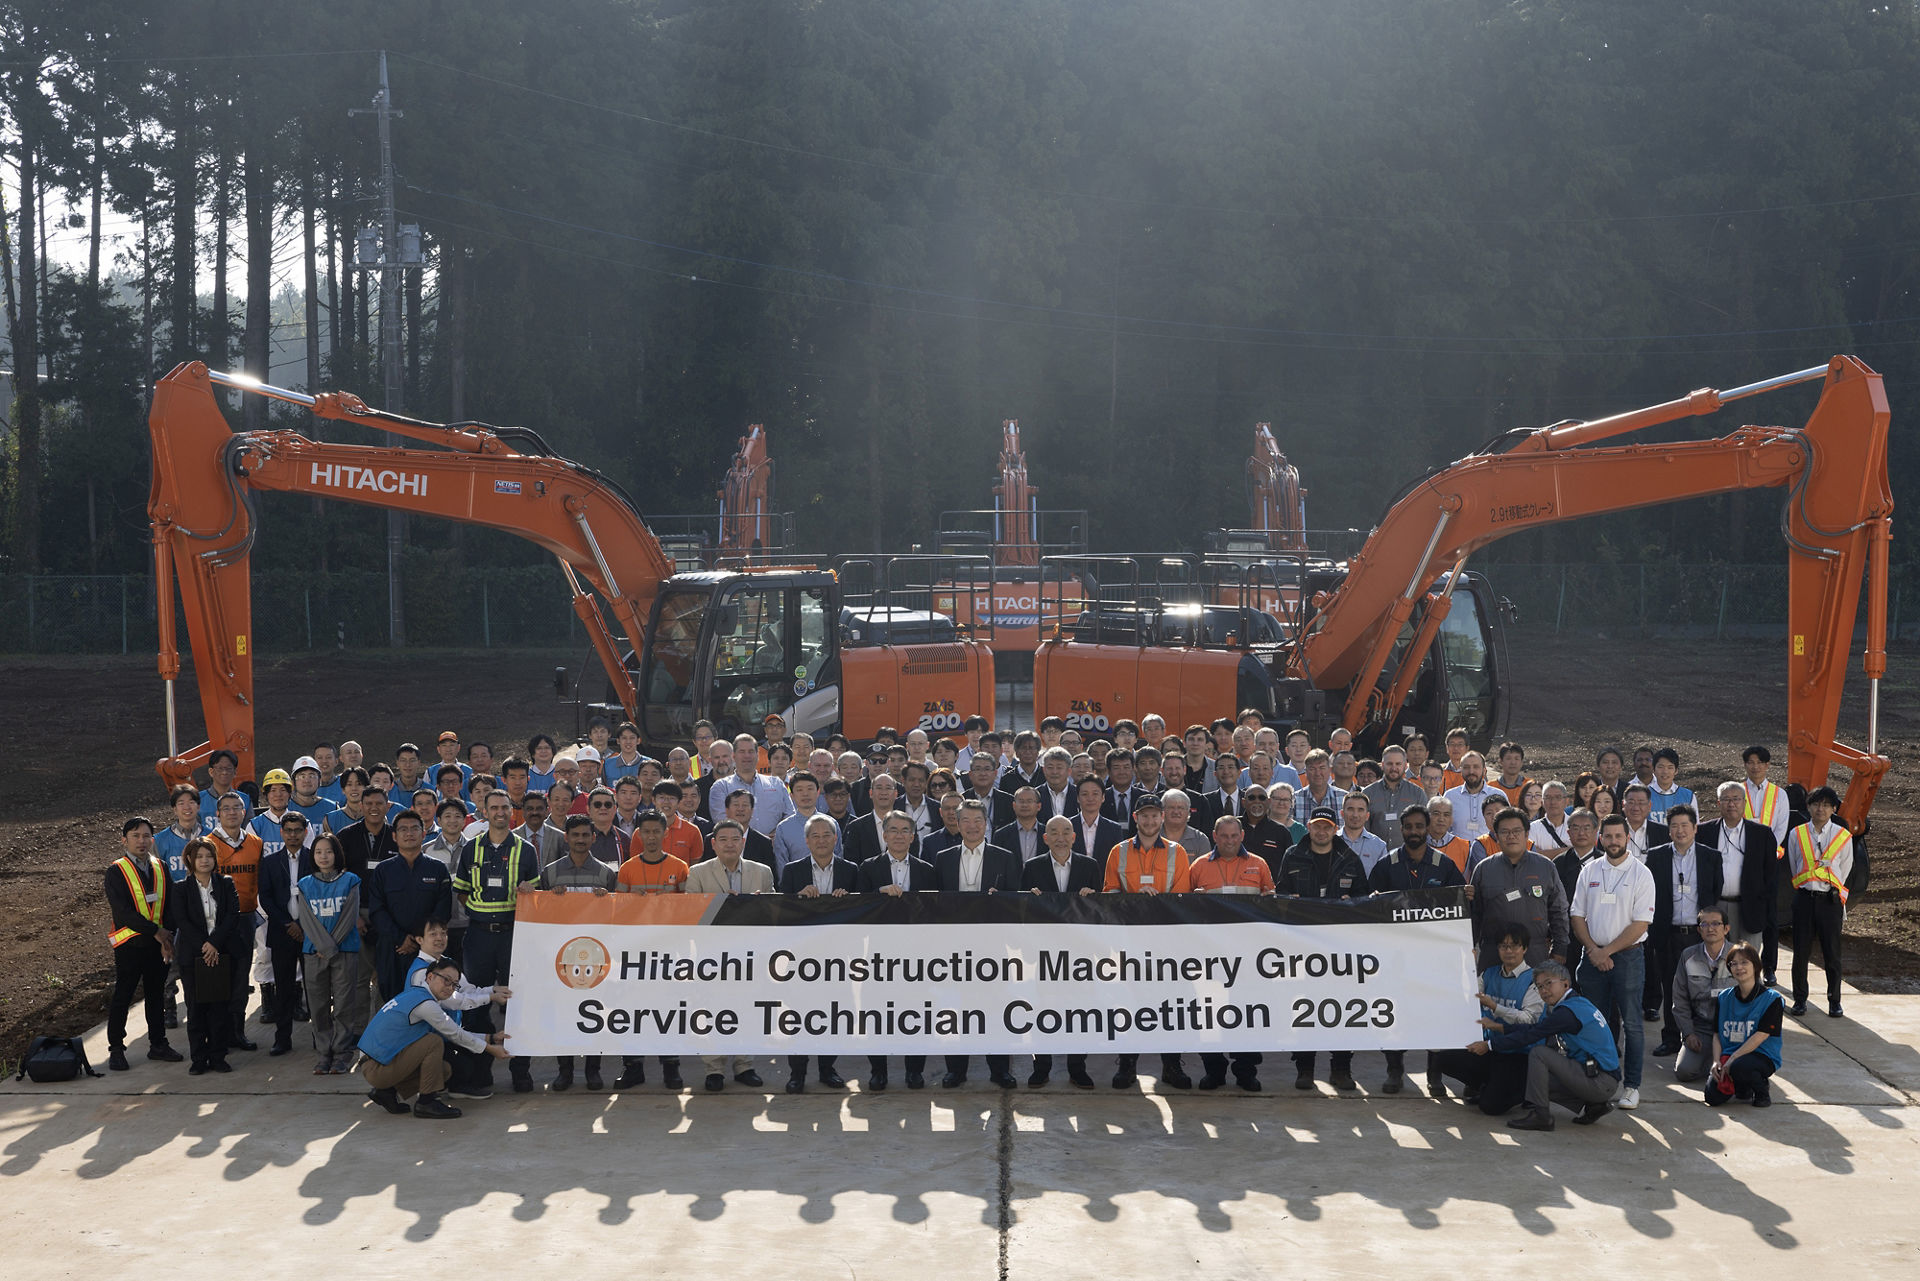 Hitachi Construction Machinery Group companies from around the world pose for a commemorative photo as "One Team"